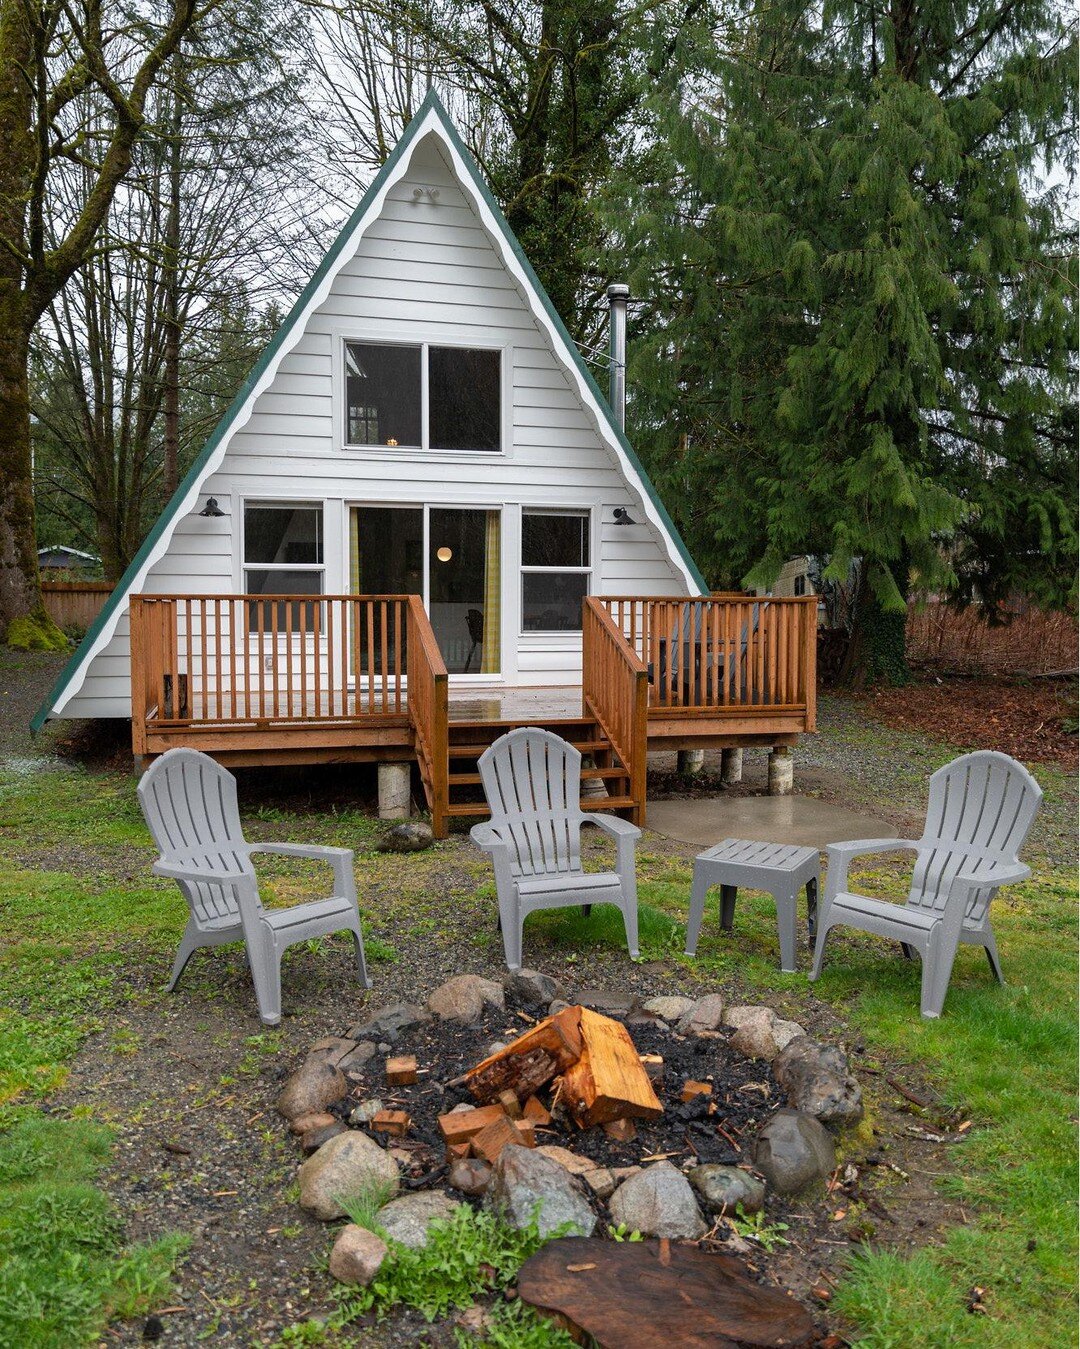 Keep an eye out for Daisy Wander Cabin. This newly renovated riverfront getaway near the Skykomish is available for booking after May. Relax in their new cedar hot tub by the river.

⛺ @happy_daisywander 
📸 @zachnicholz 

 #explorewashstate #washing